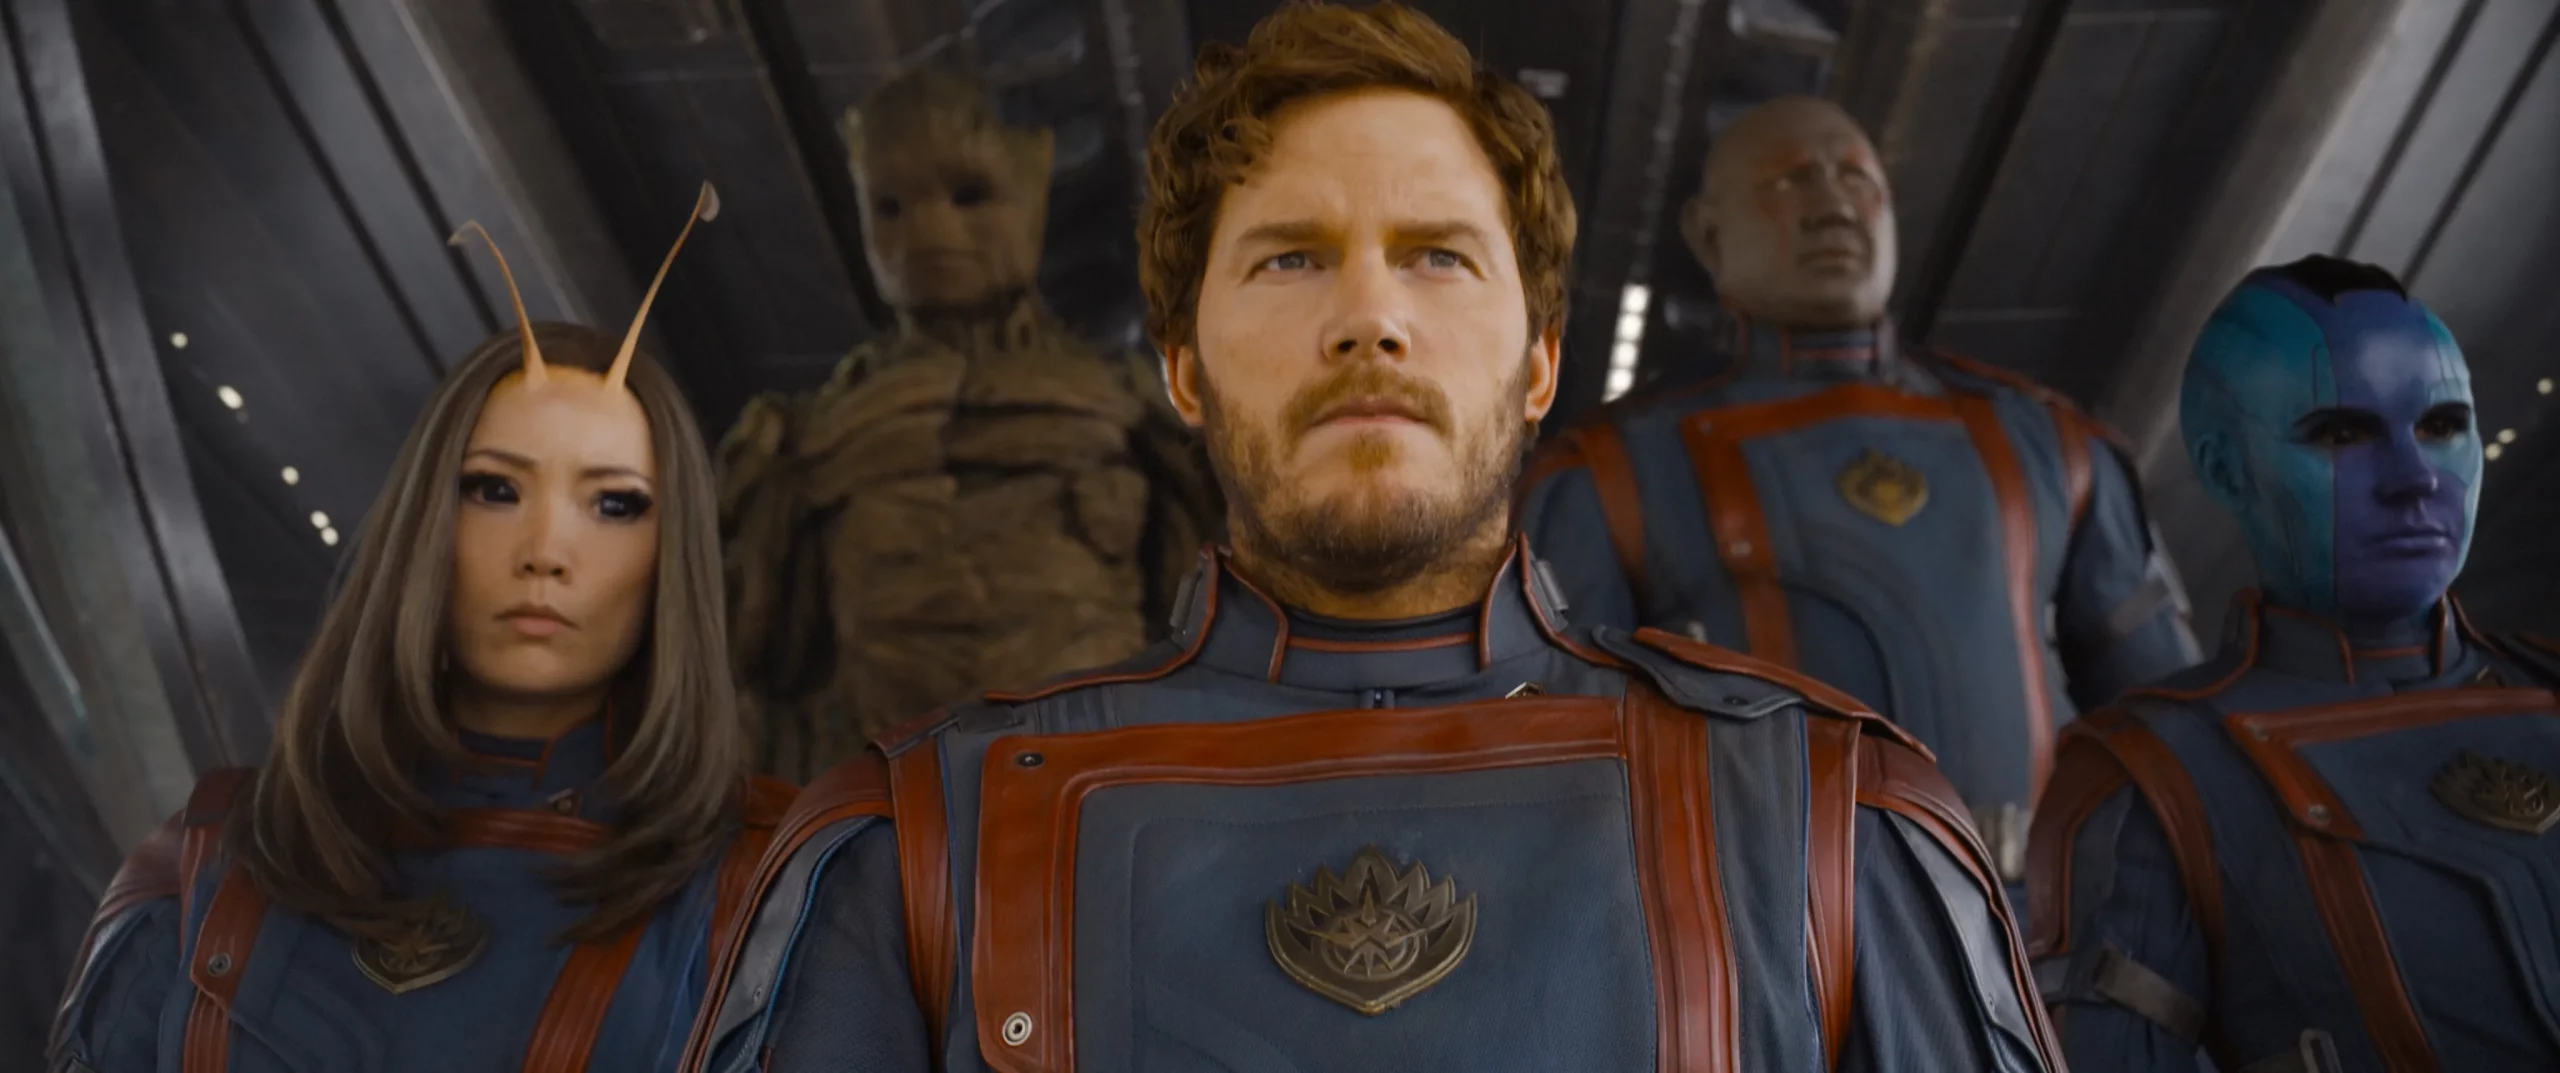 Starlord and team look out triumphantly. Photo courtesy of Marvel Studios.